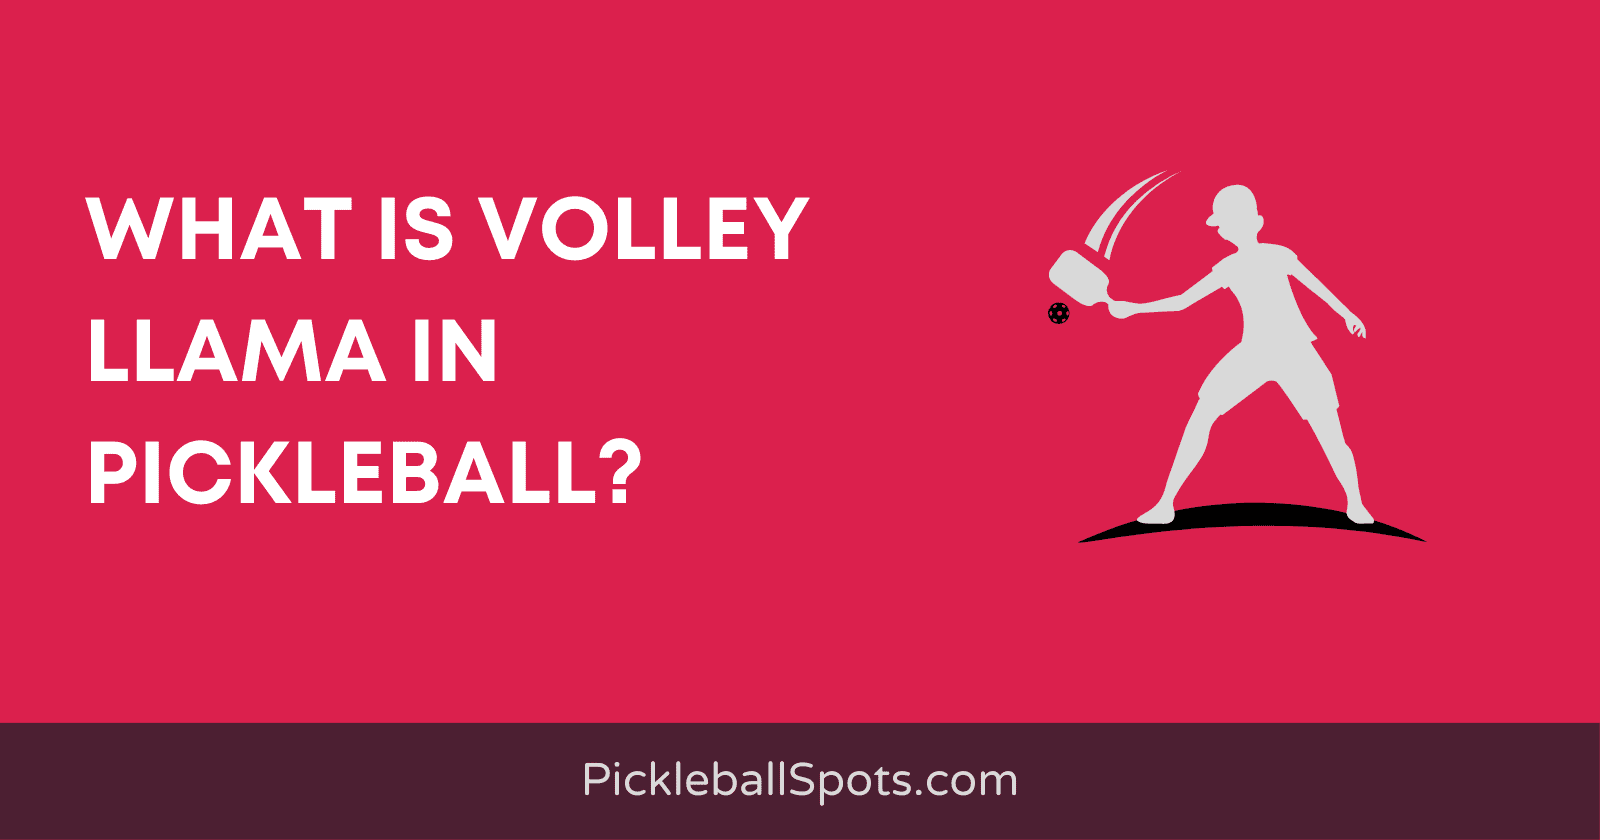 What Is Volley Llama In Pickleball